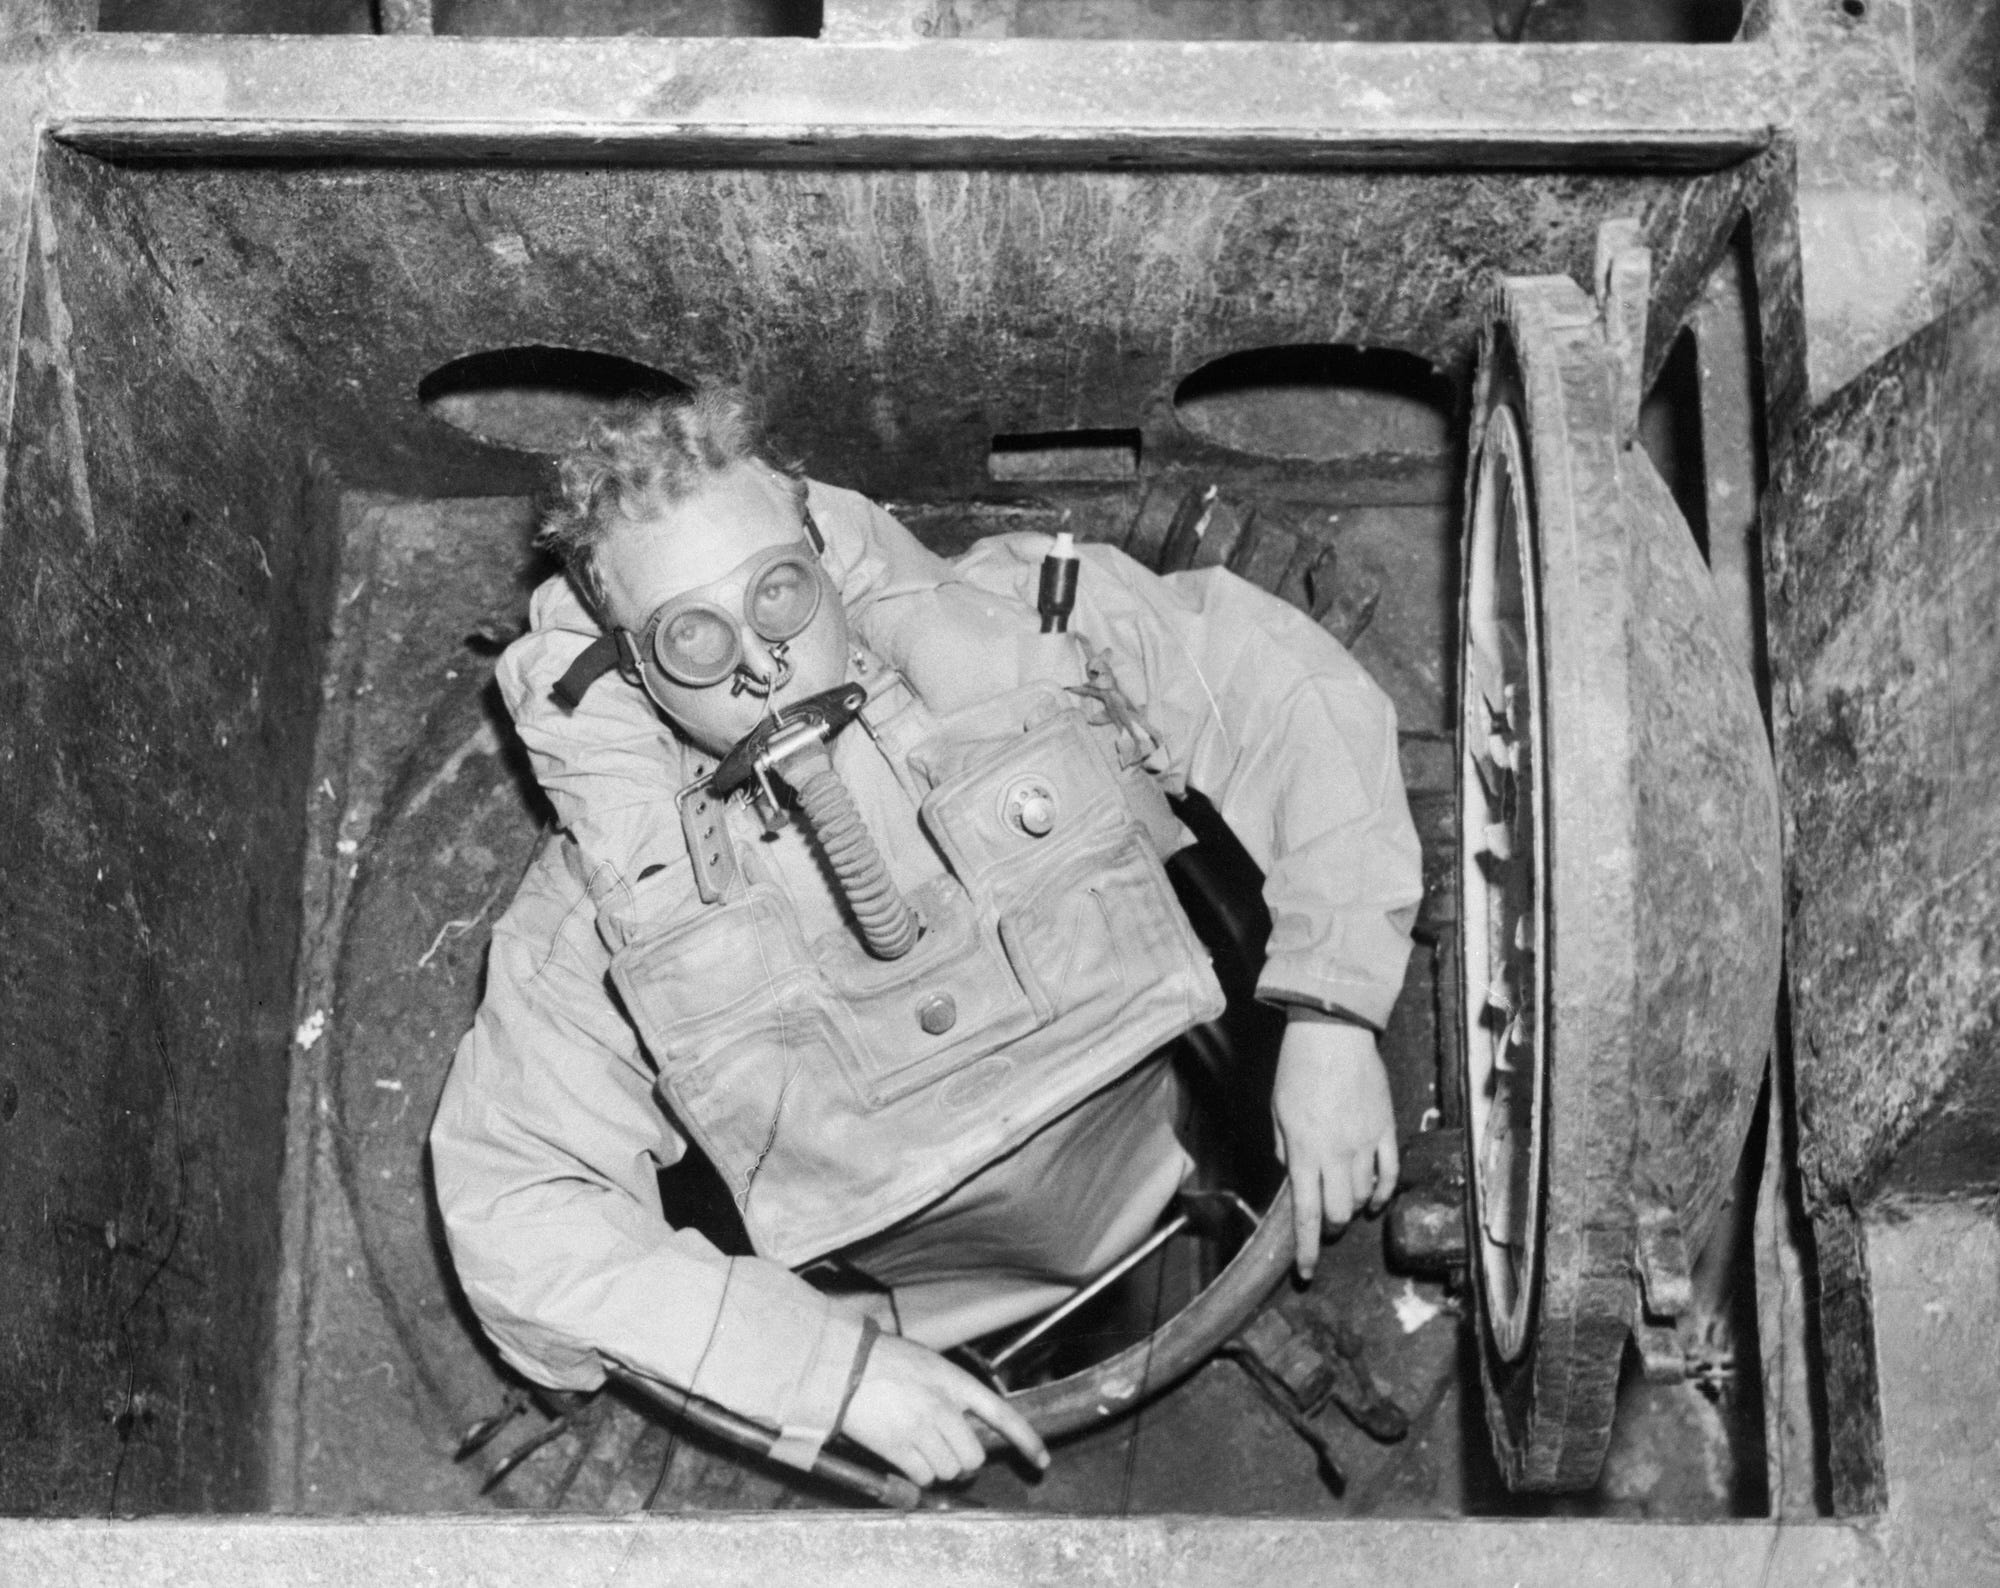 microsoft, a group of wwii-era scientists used themselves as guinea pigs to learn to breathe underwater. their experiments helped make d-day possible.